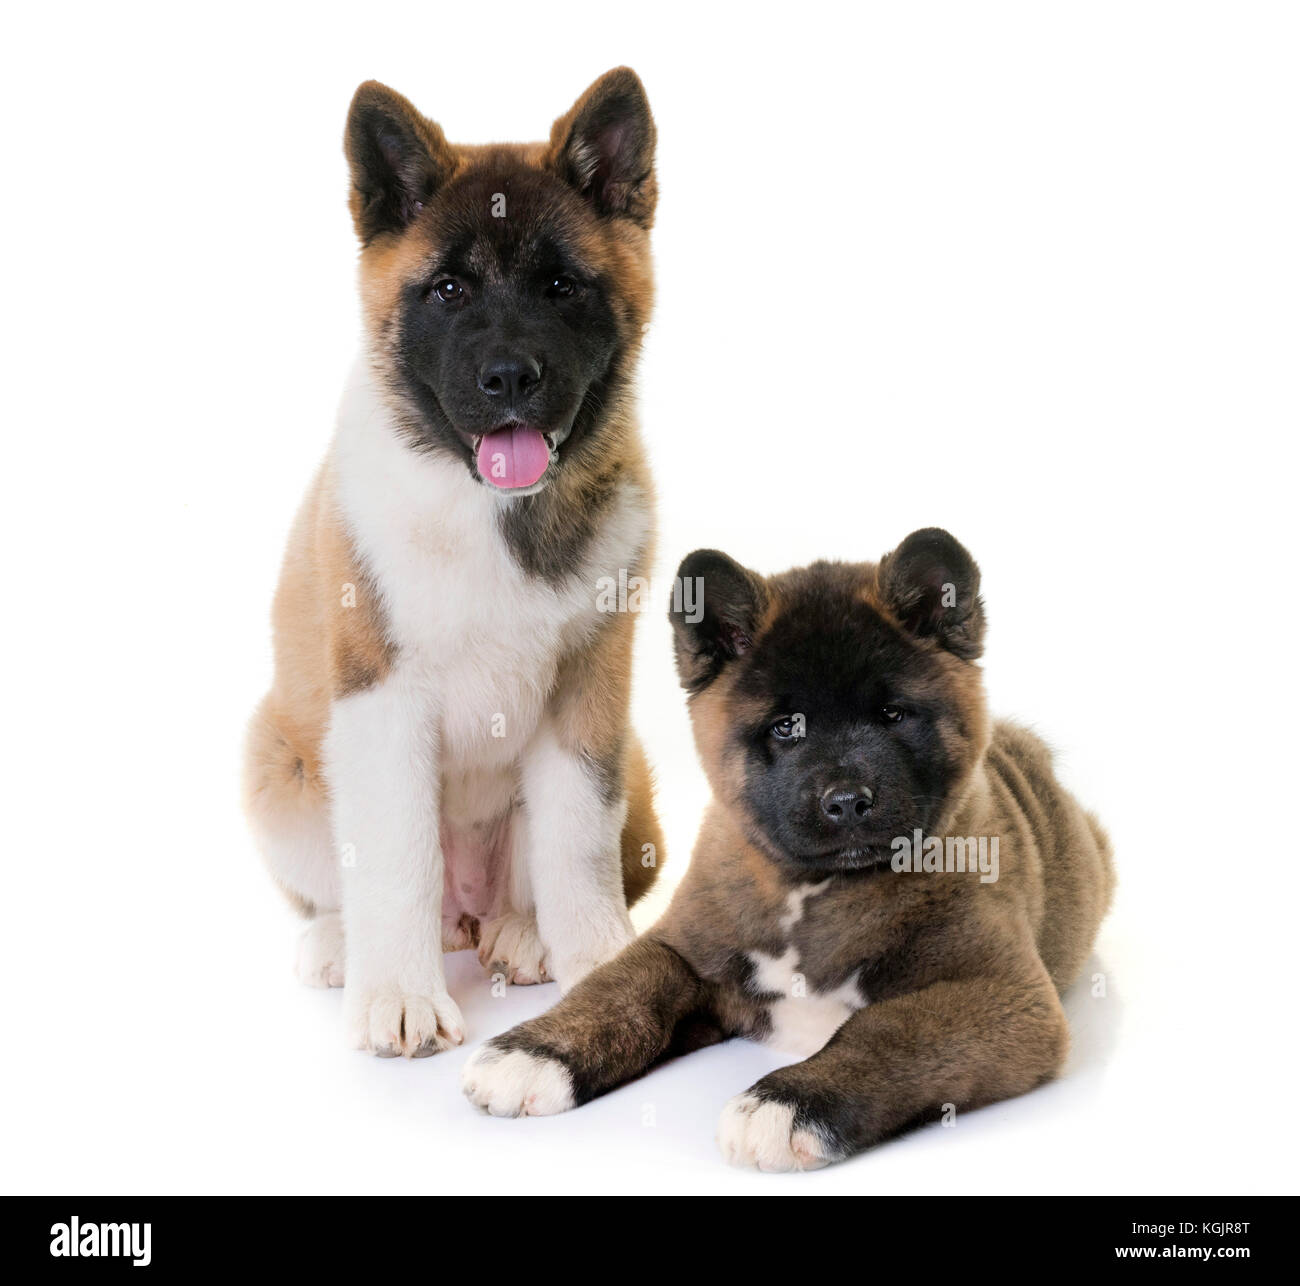 Page 3 - Akita Inu Puppies High Resolution Stock Photography and Images -  Alamy